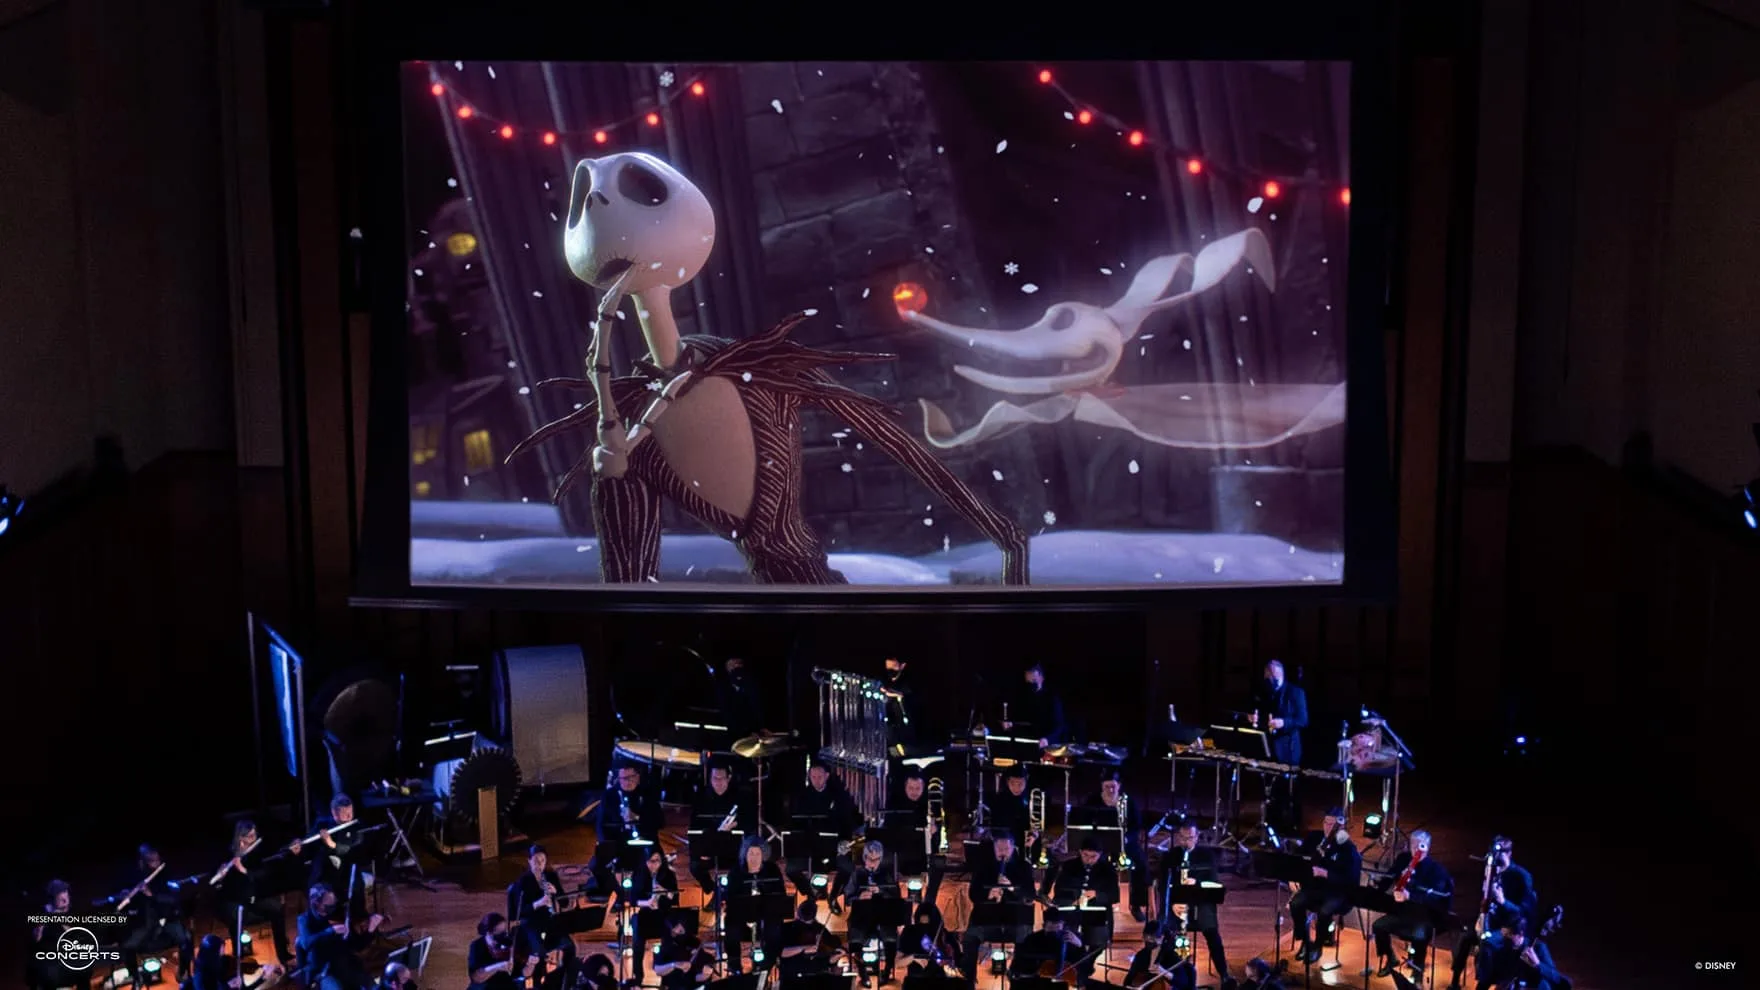 An orchestra plays against a giant screen playing The Nightmare Before Christmas.